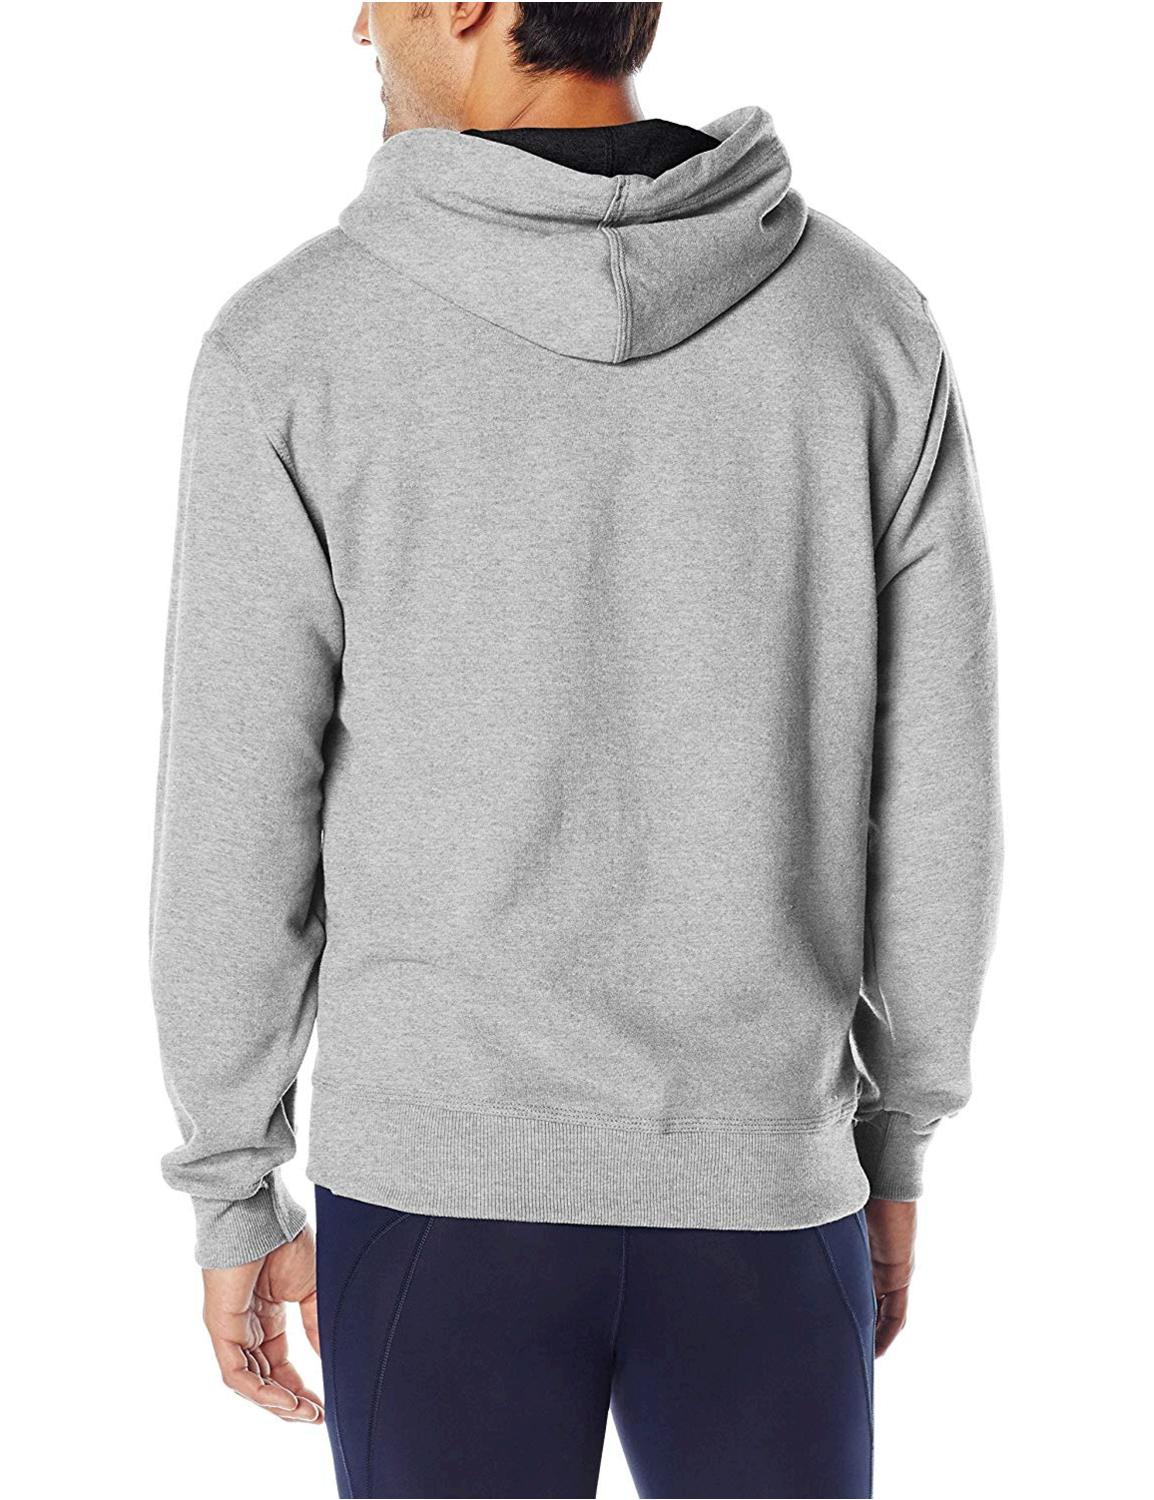 Champion Men's Powerblend Pullover Hoodie, Oxford, Oxford Gray, Size XX ...